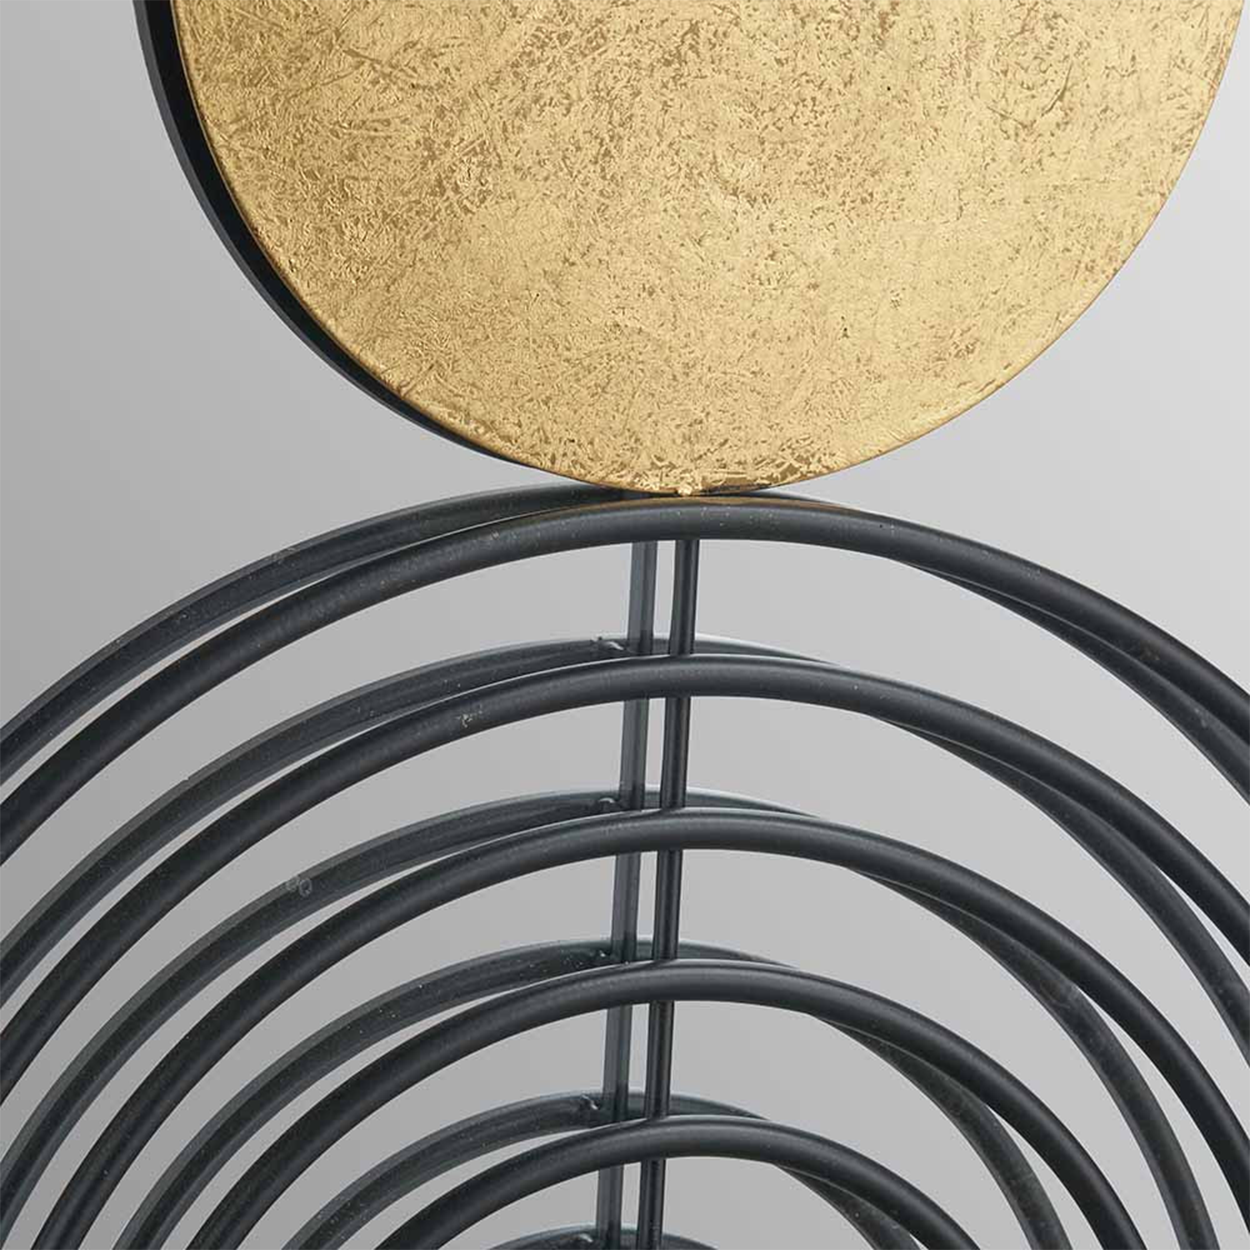 Set of 2 Mirrored Black and Gold Metal Wall Art